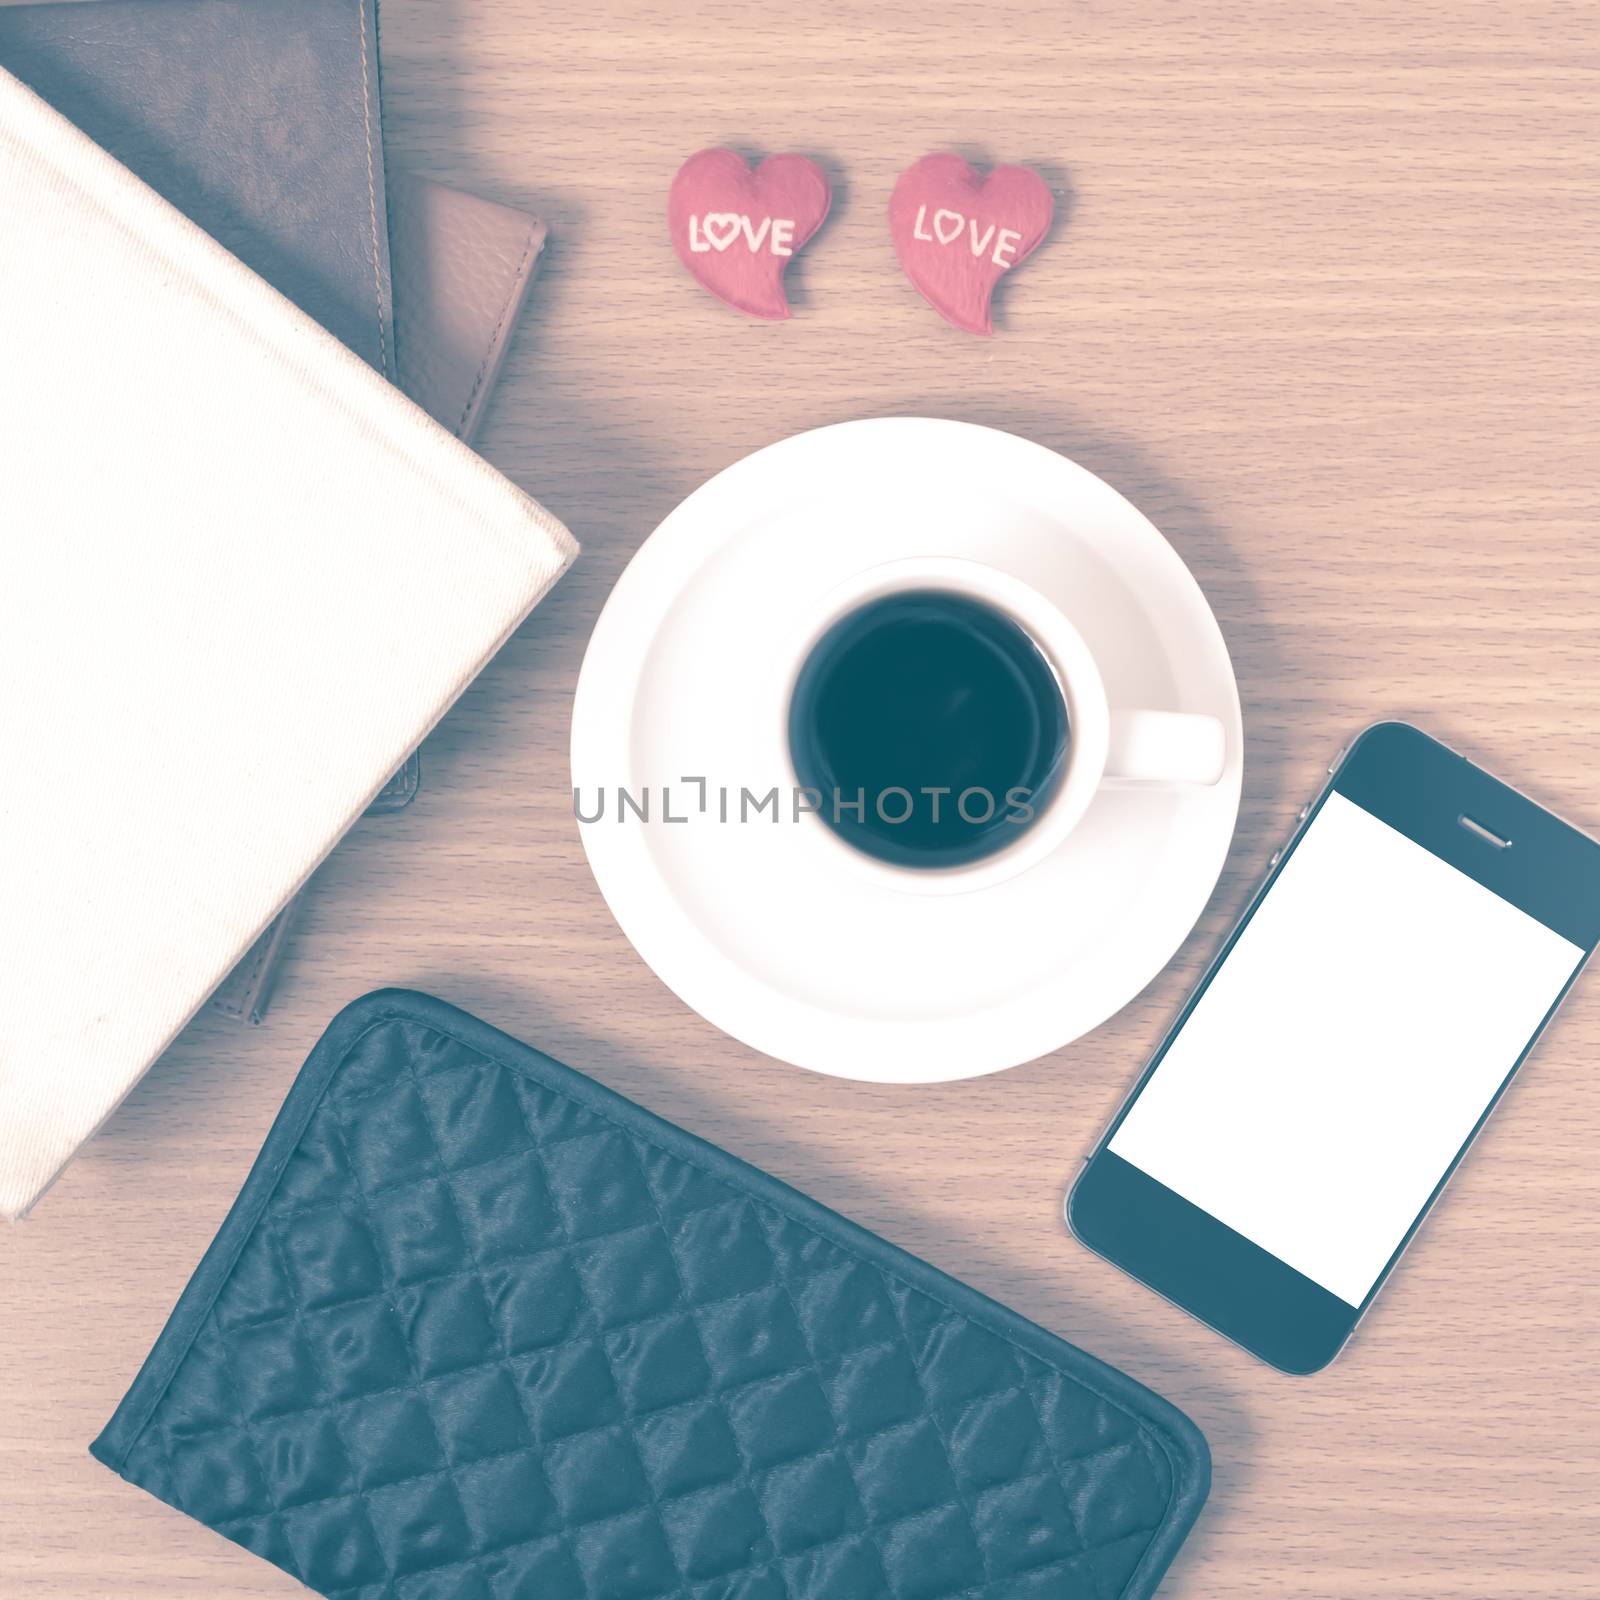 office desk : coffee with phone,heart,stack of book,wallet on wood background vintage style